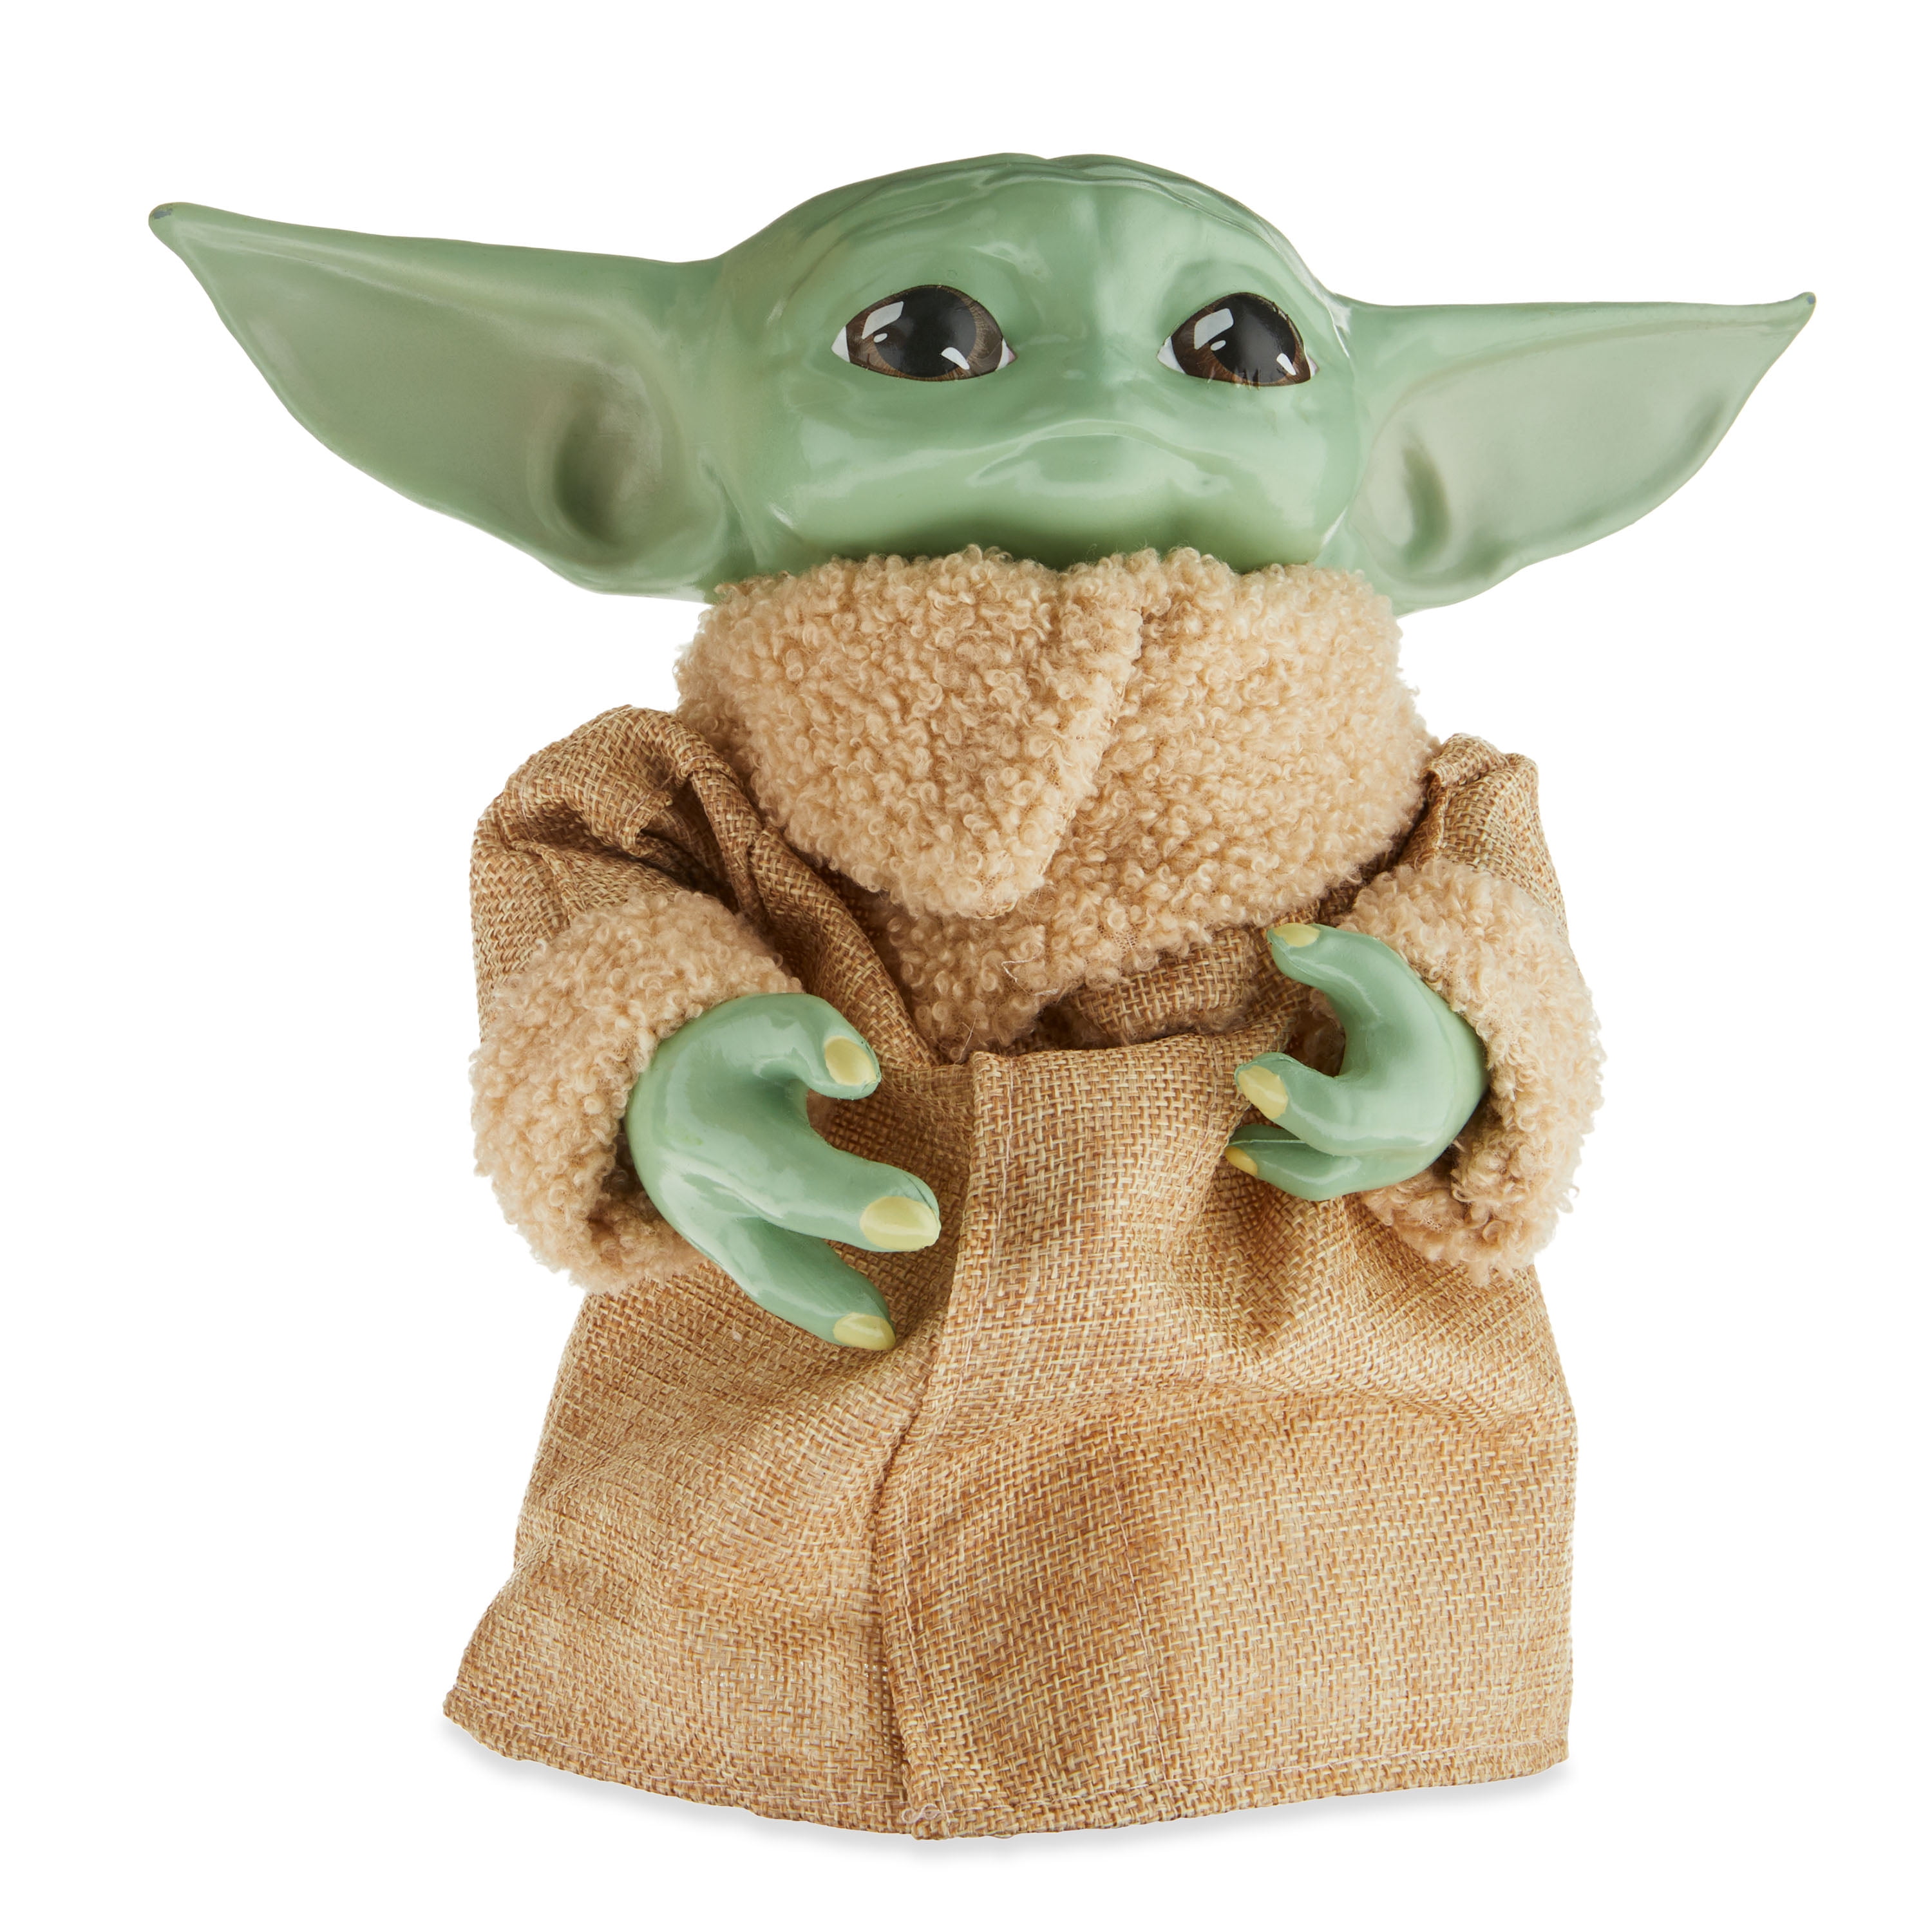 Star Wars The Child *Baby Yoda* Christmas Tree Topper $5 was $35.88 ships free W+ $5.00